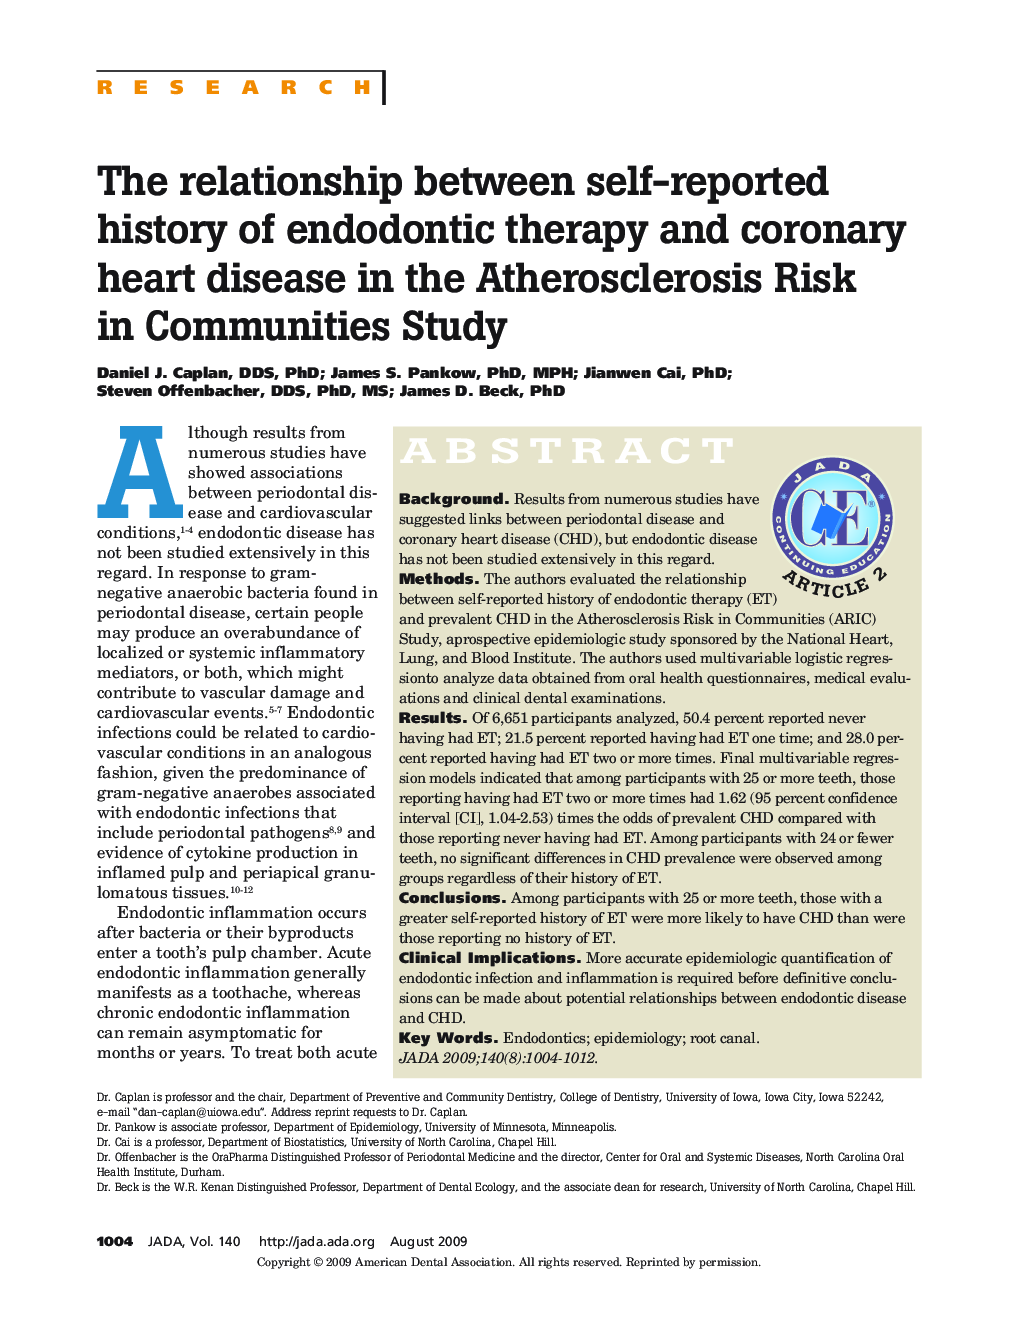 The Relationship Between Self-Reported History of Endodontic Therapy and Coronary Heart Disease in the Atherosclerosis Risk in Communities Study 